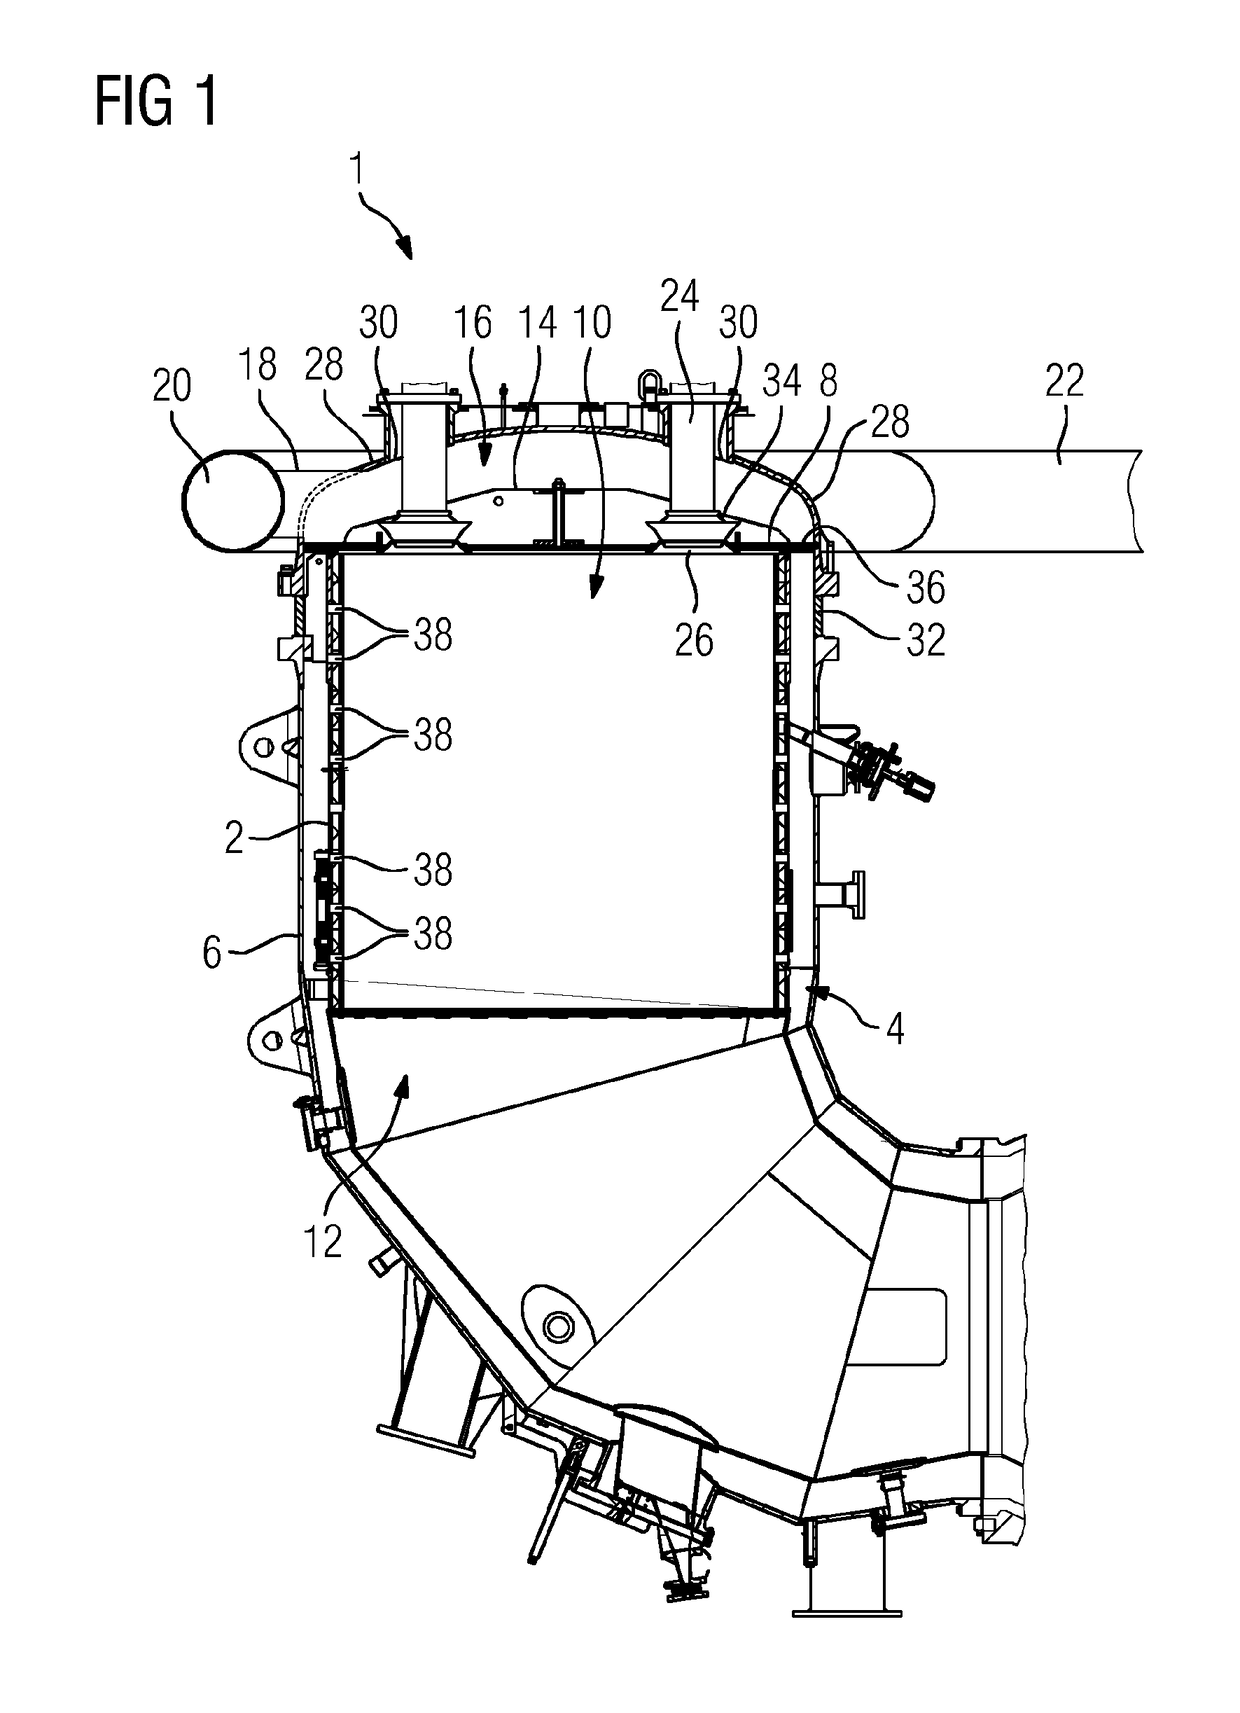 Silo combustion chamber for a gas turbine